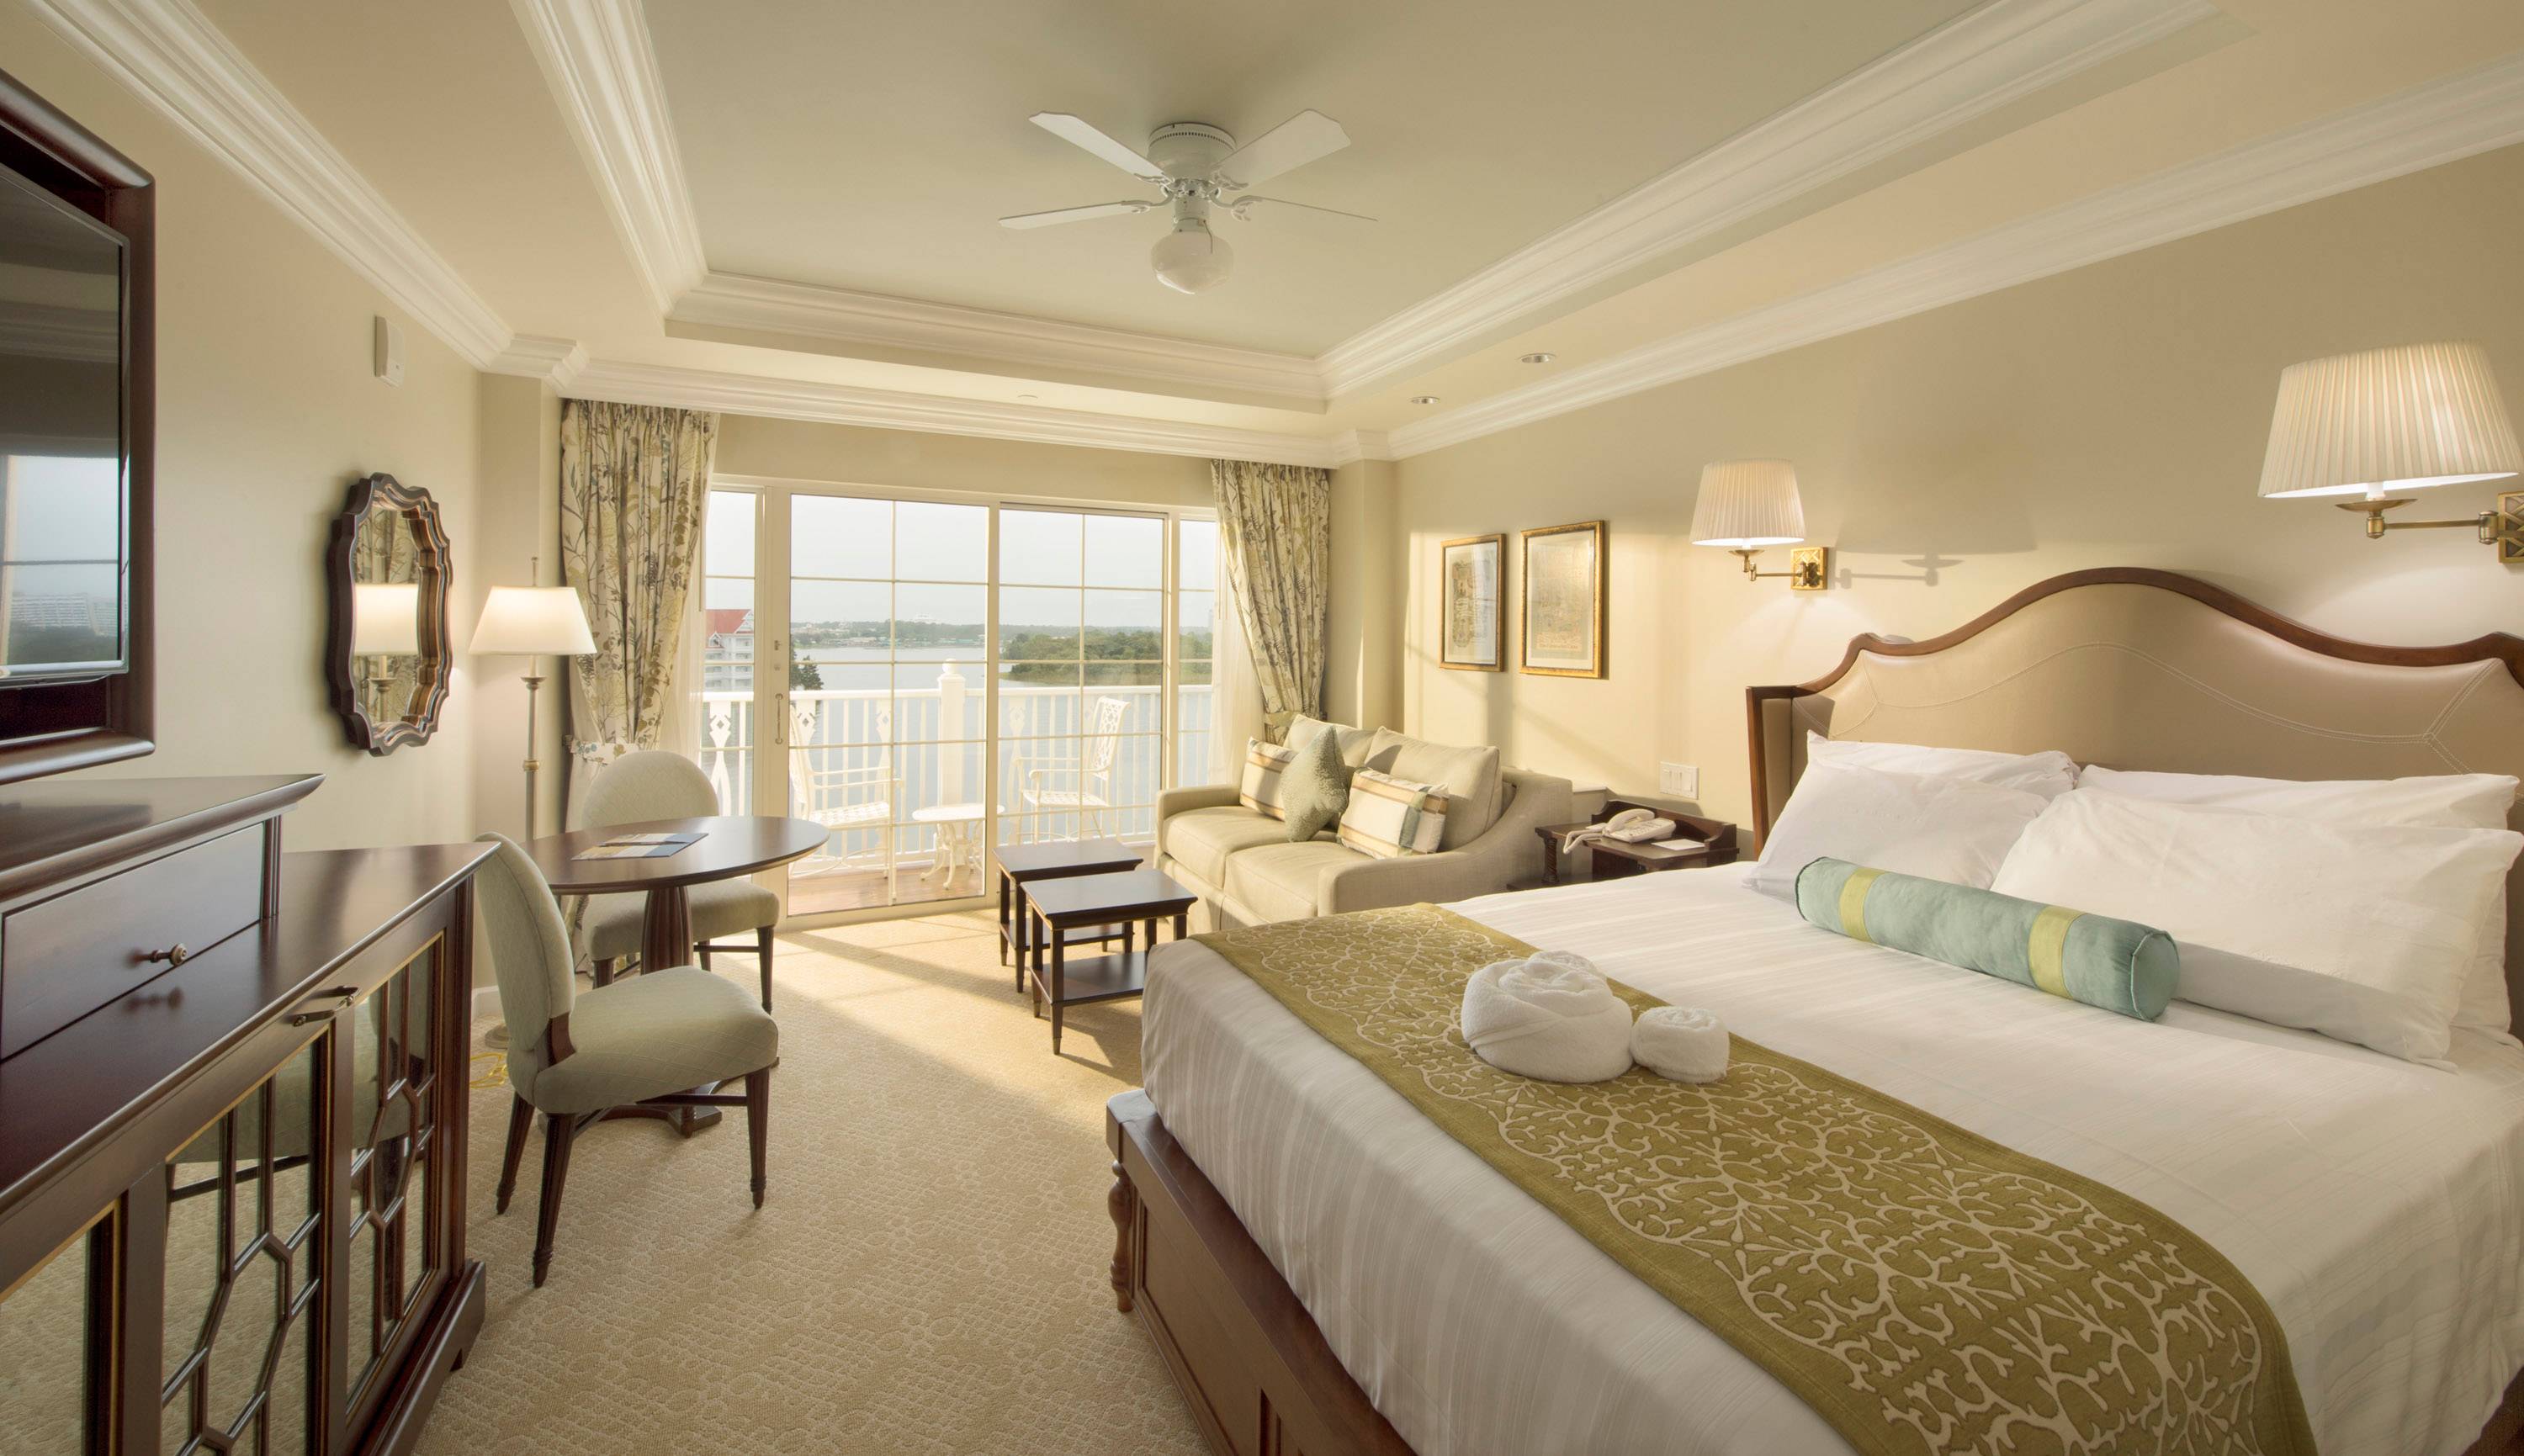 PHOTOS - The Villas at Disney's Grand Floridian Resort are now officially open